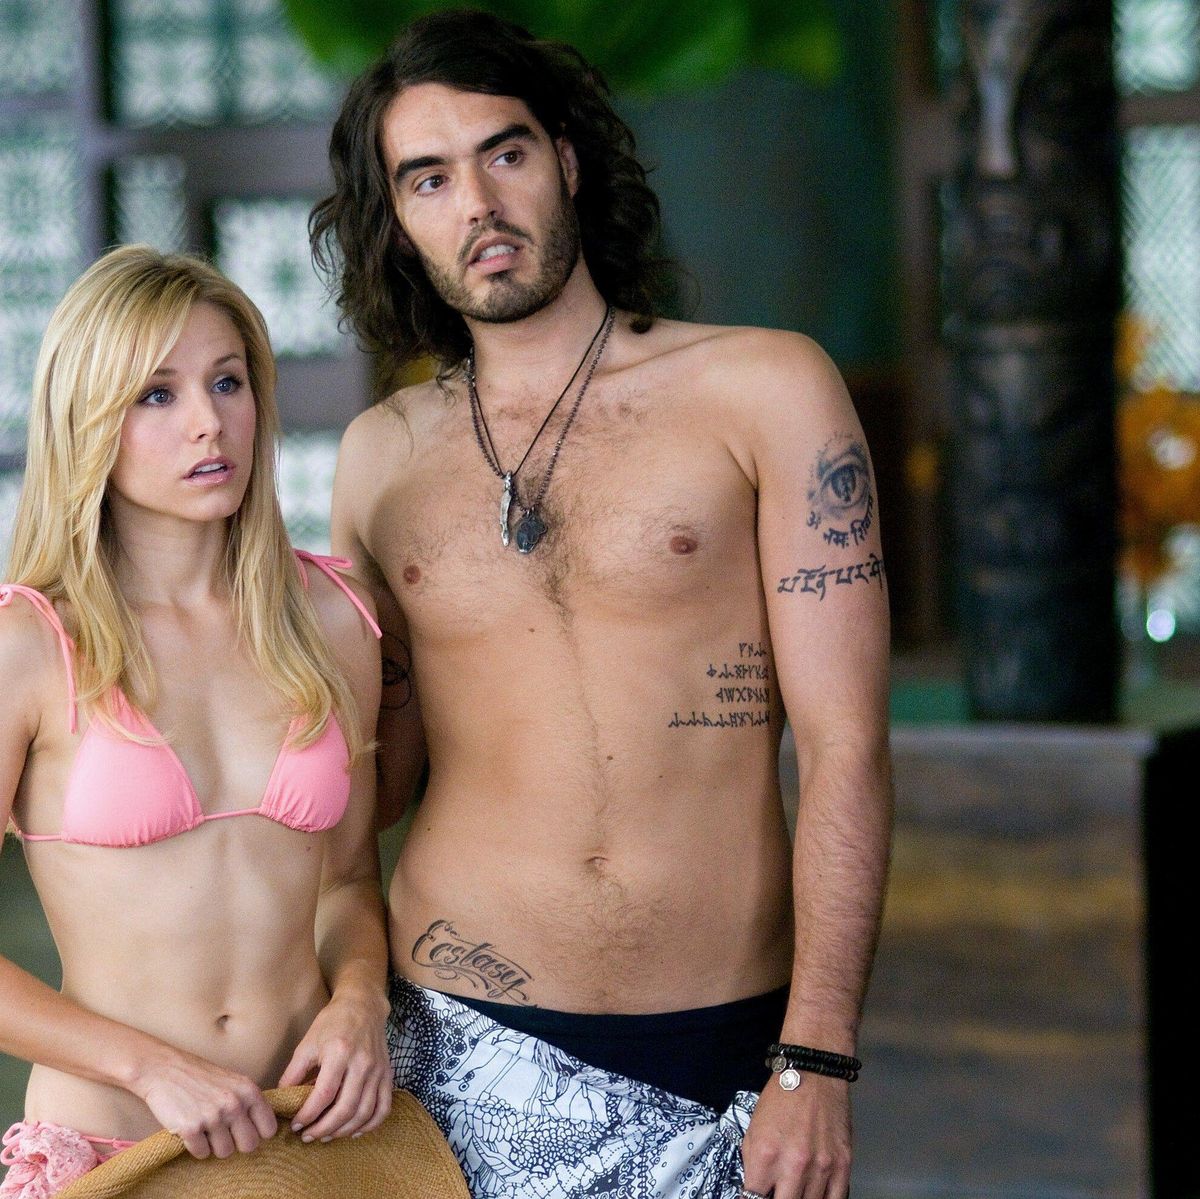 15 Years Ago, Russell Brand Peaked in 'Forgetting Sarah Marshall'